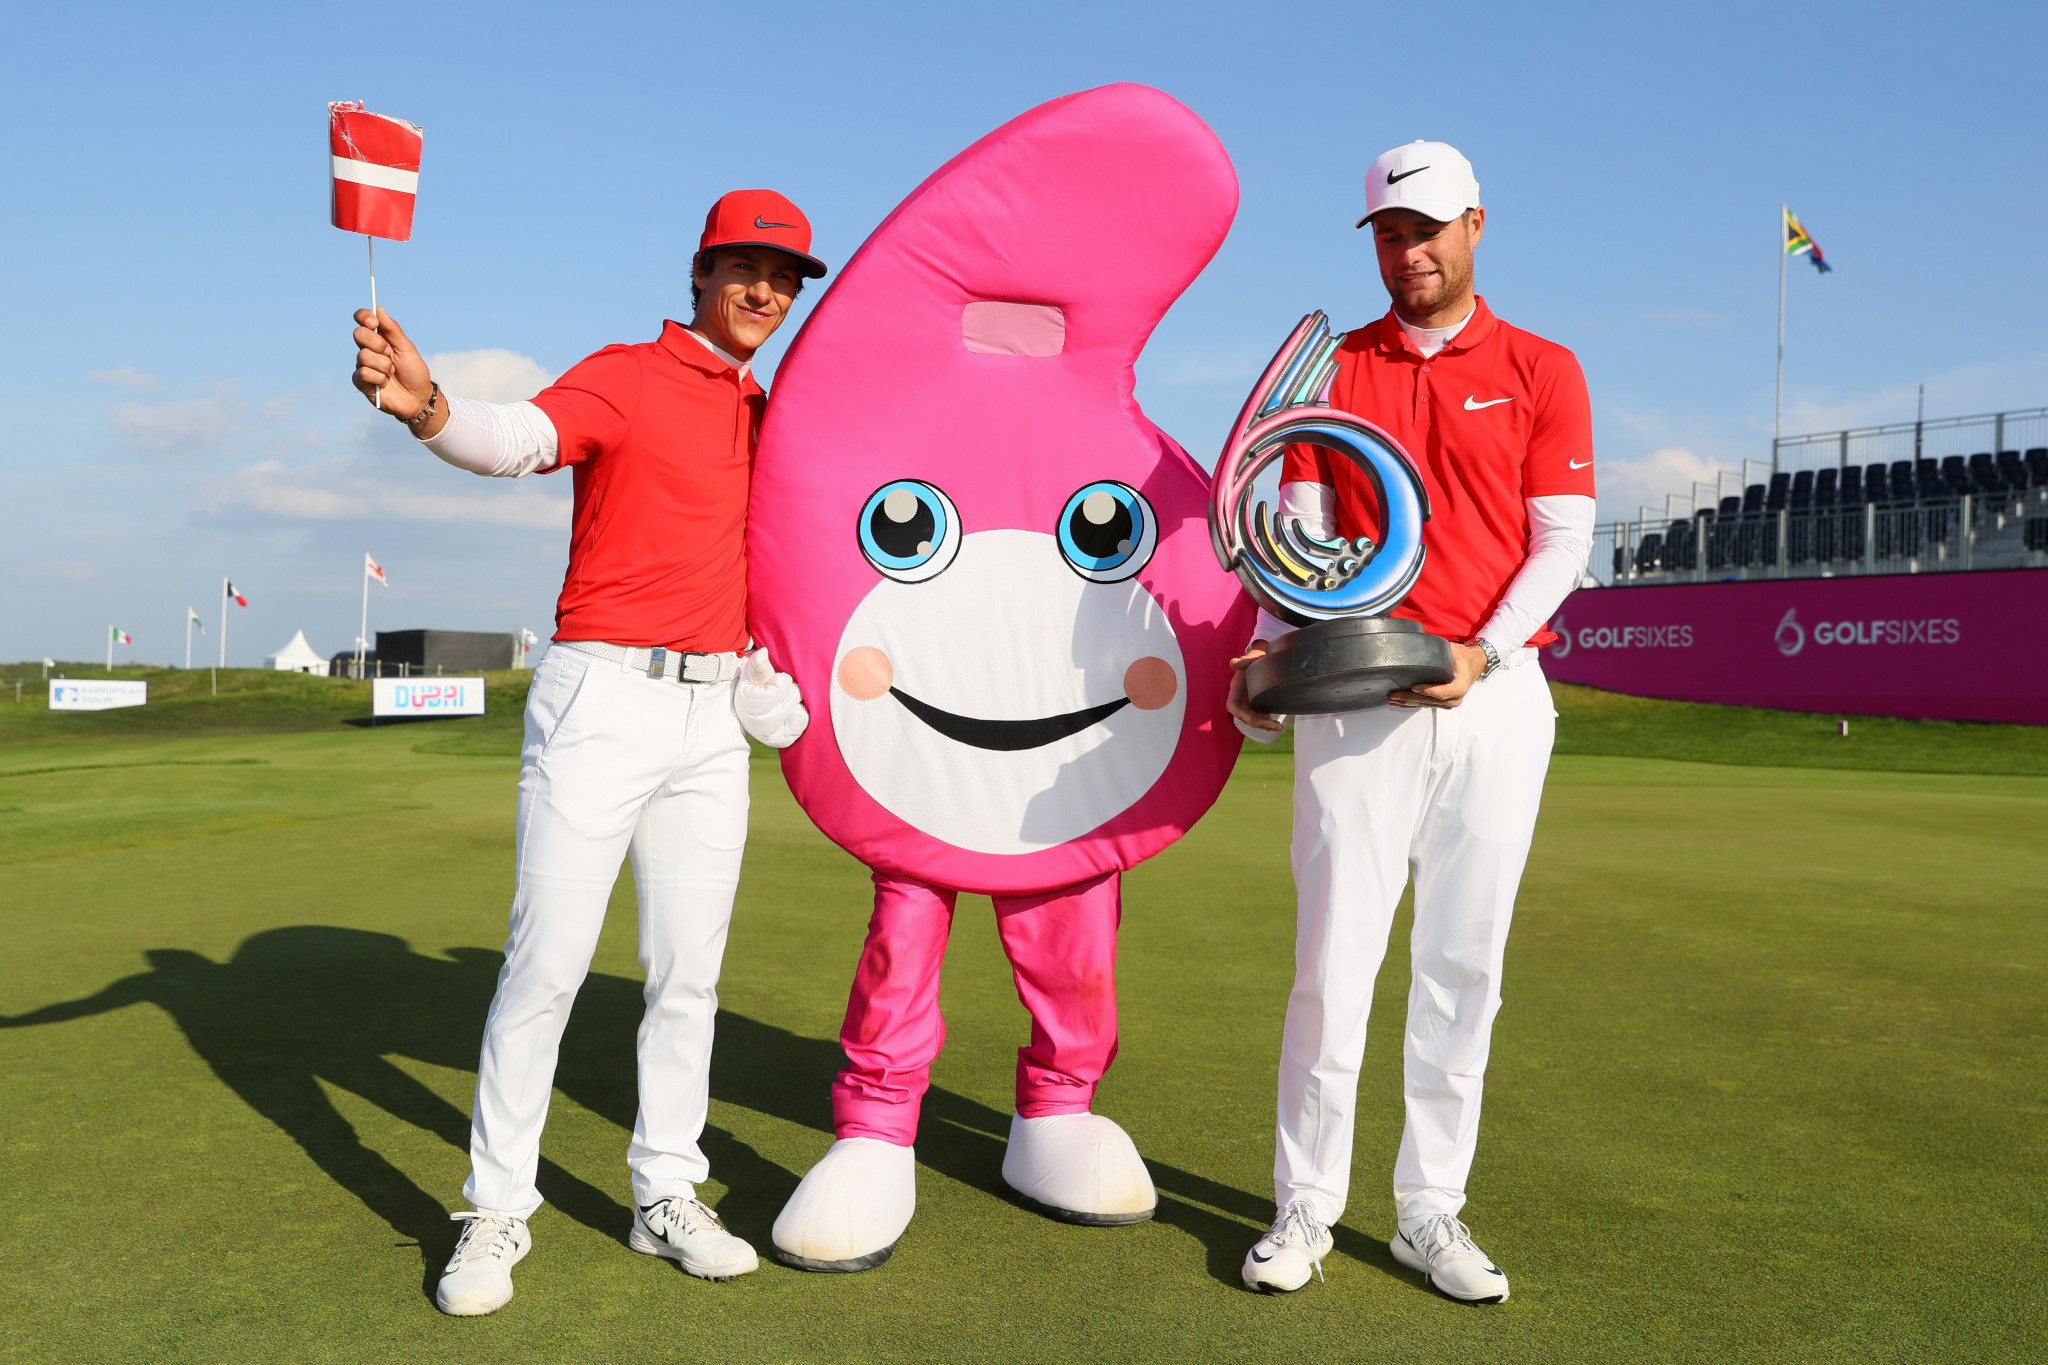 Denmark’s Thorbjørn Olesen and Lucas Bjerregaard won the inaugural edition of the event in 2017 ©Getty Images